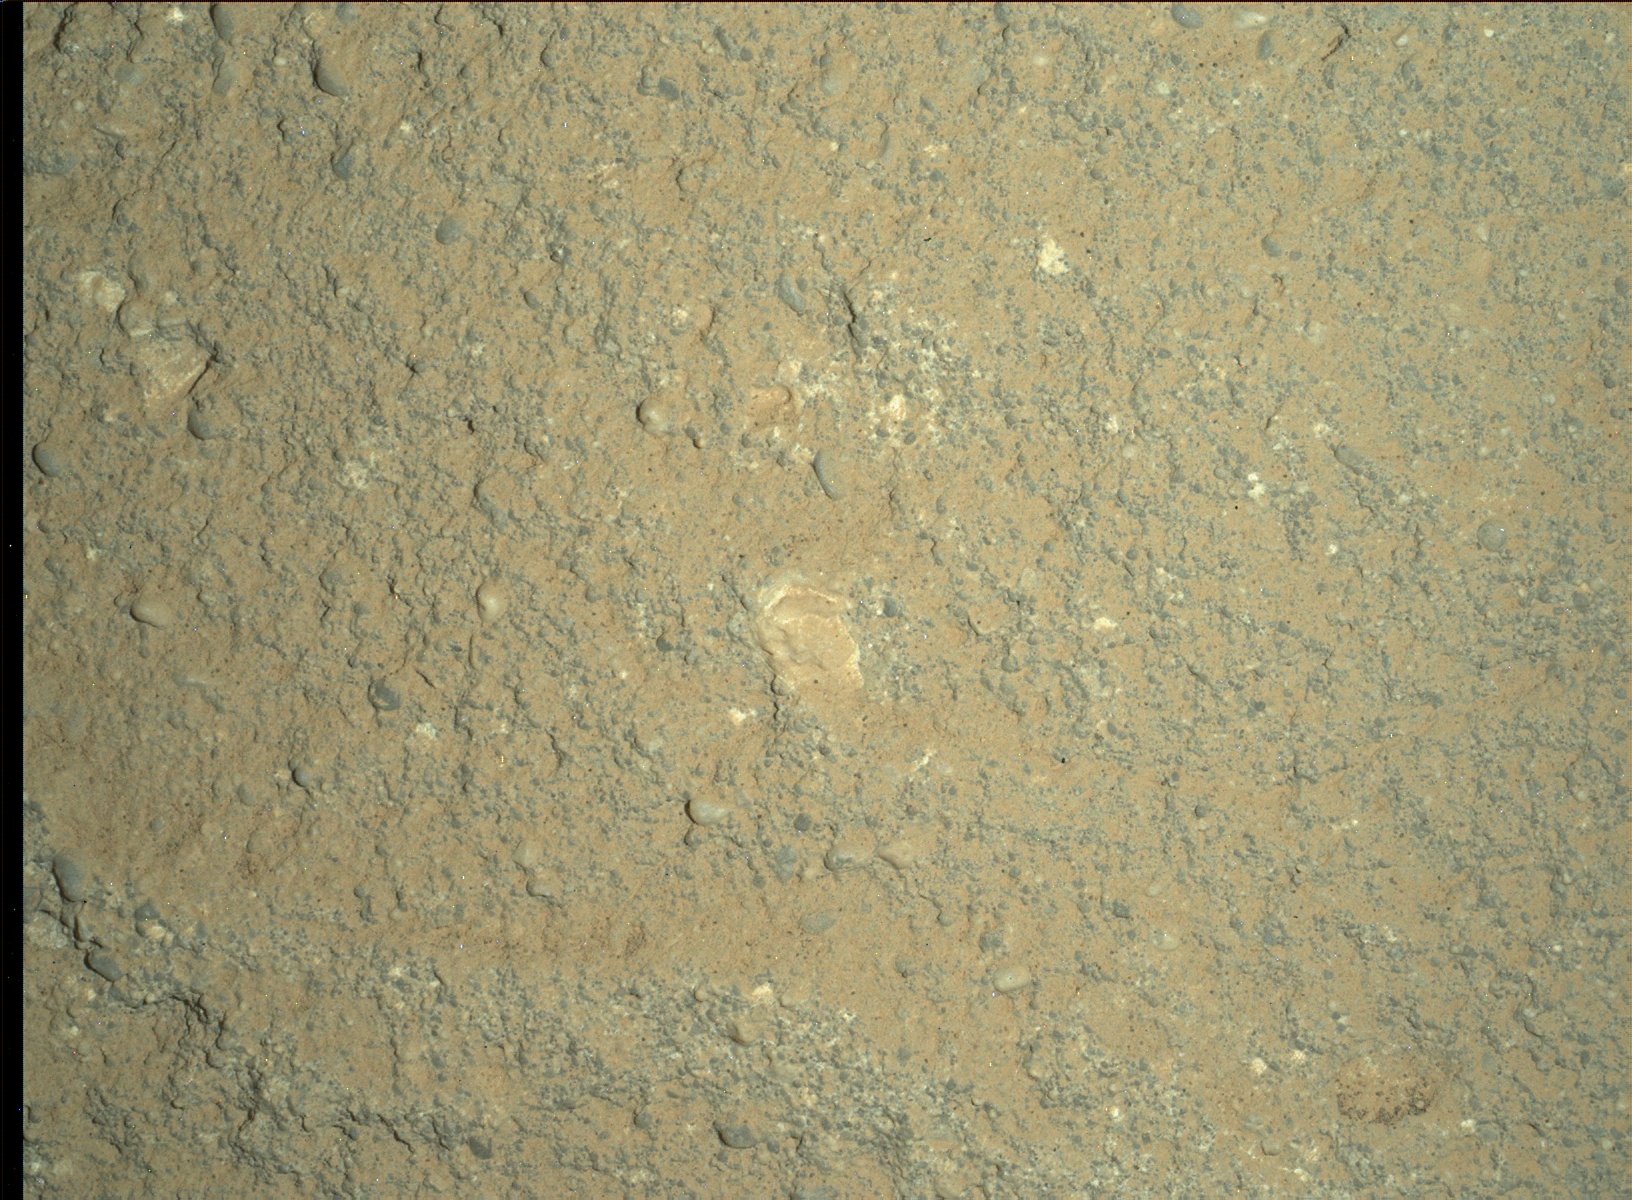 Nasa's Mars rover Curiosity acquired this image using its Mars Hand Lens Imager (MAHLI) on Sol 1028